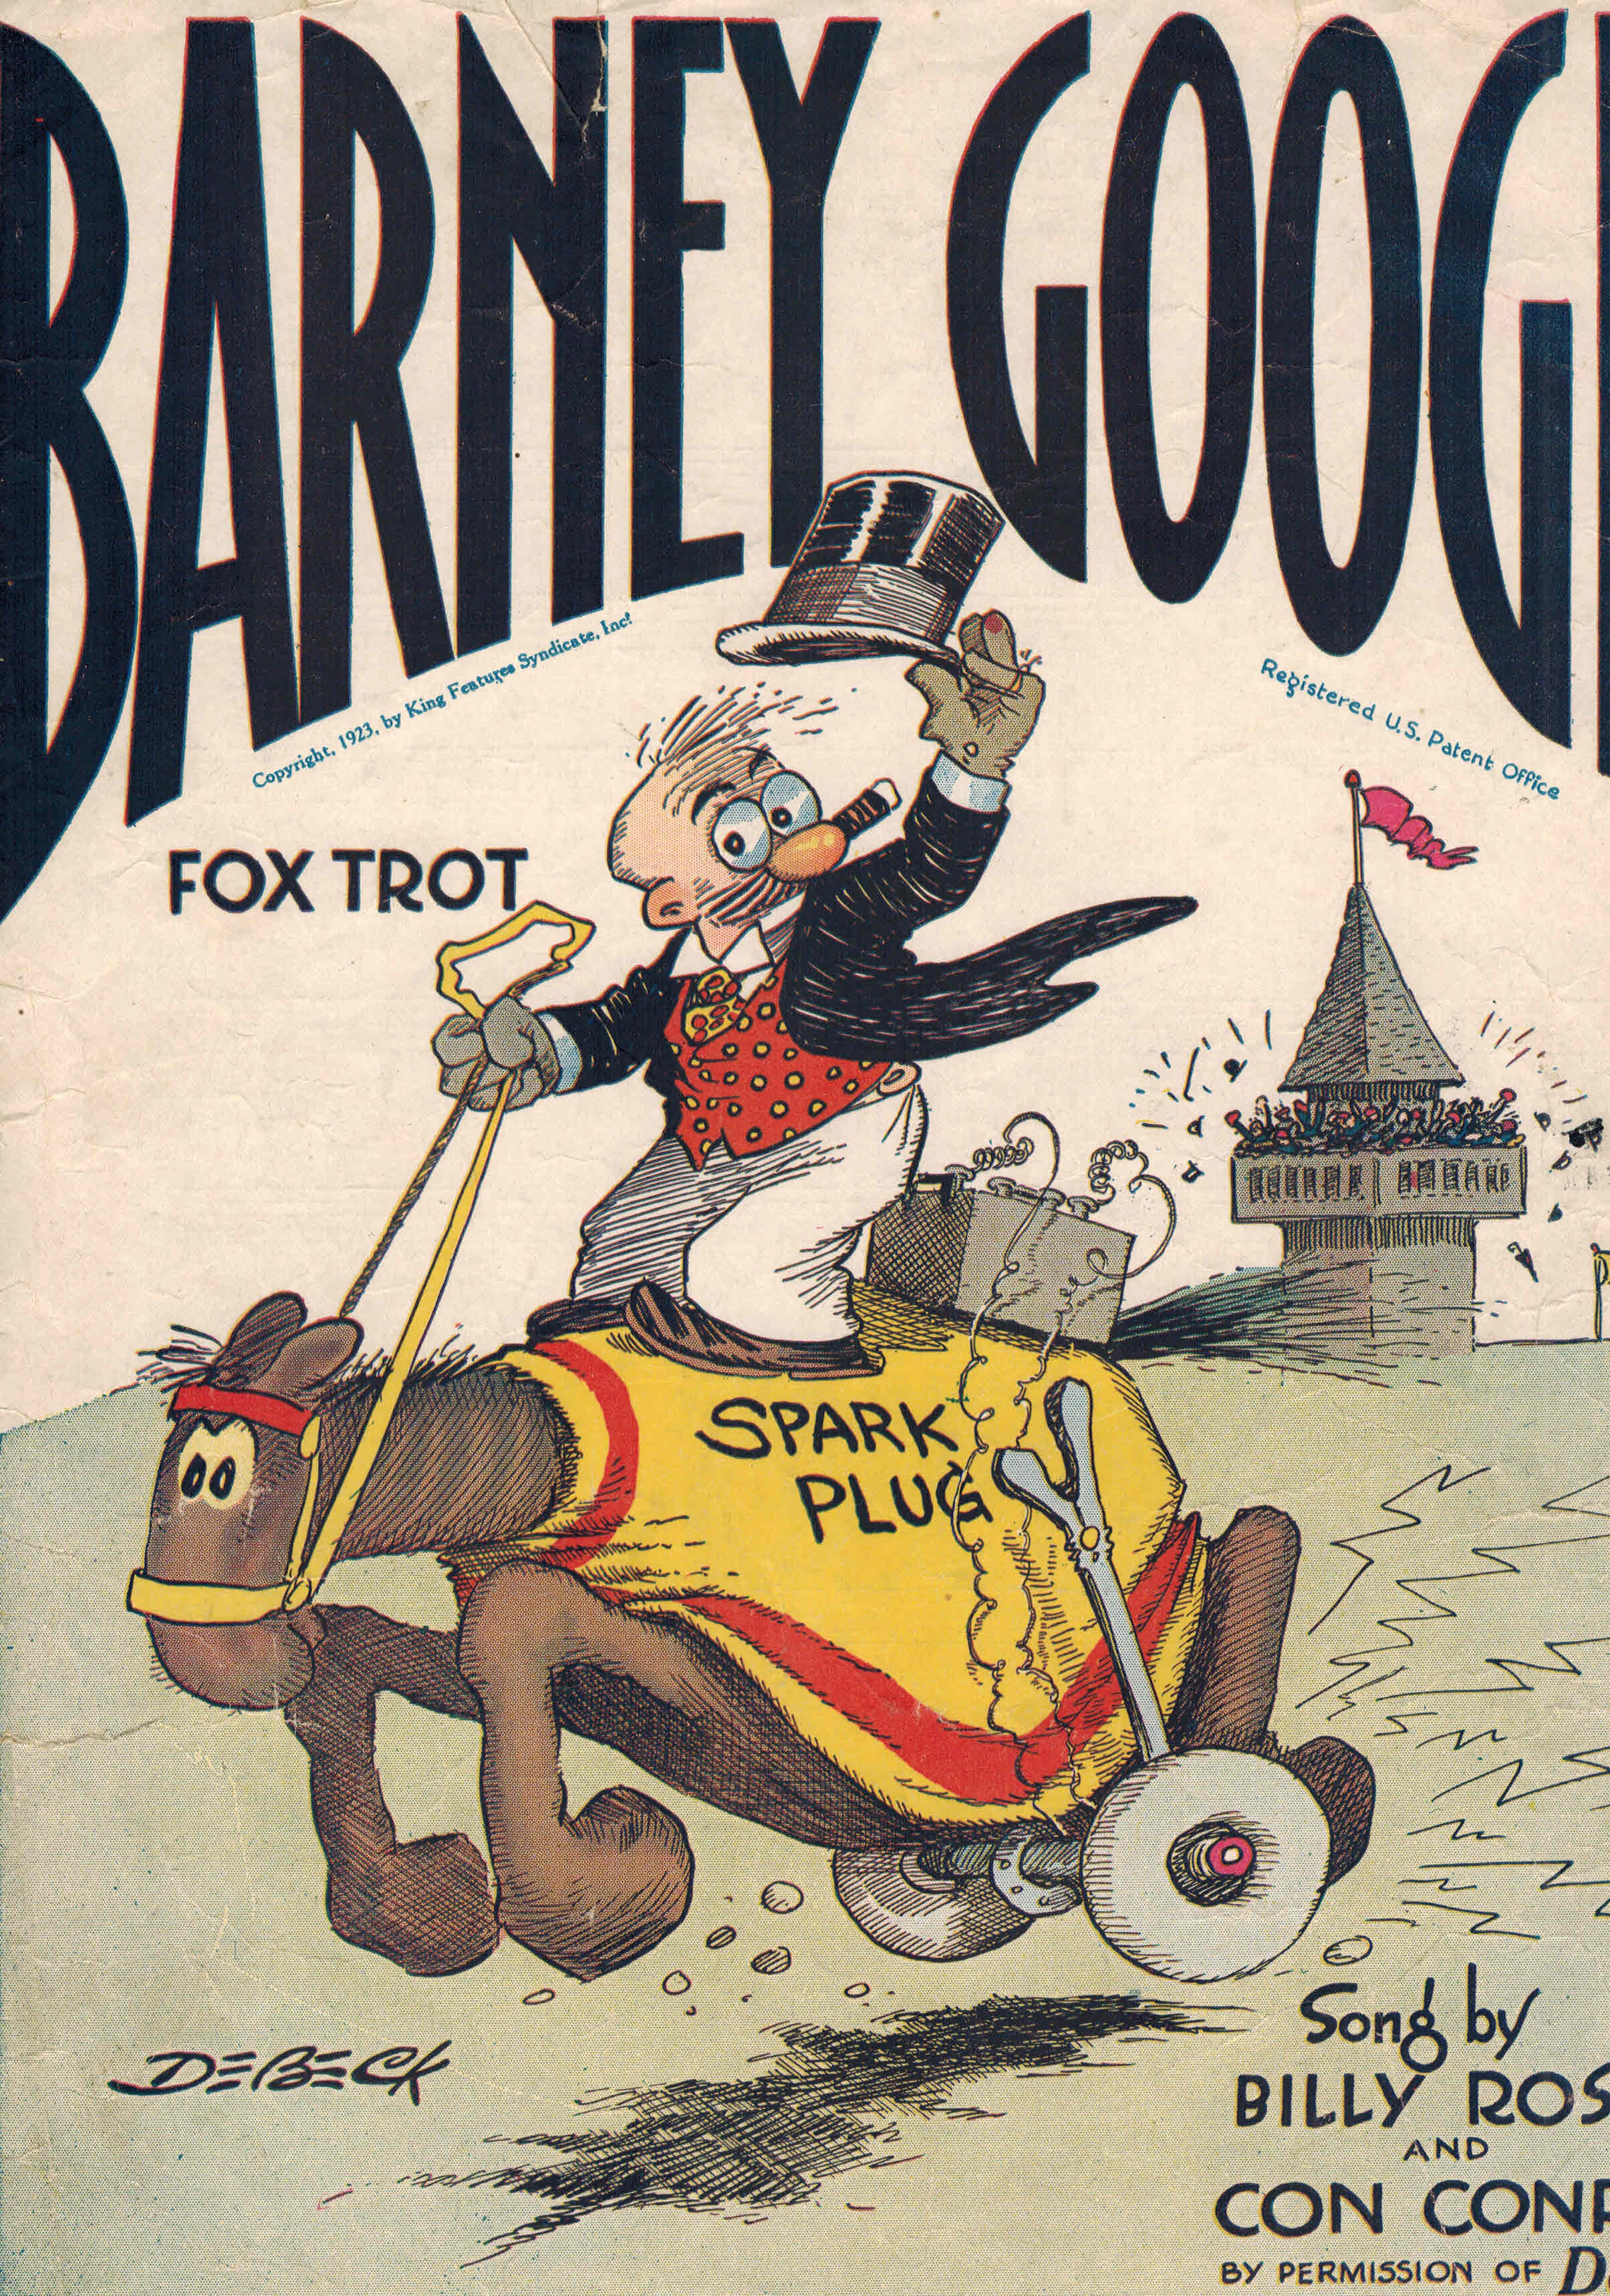 Image for Barney Google Fox Trot - Vintage Sheet Music - Billy Debeck Cartoon Cover